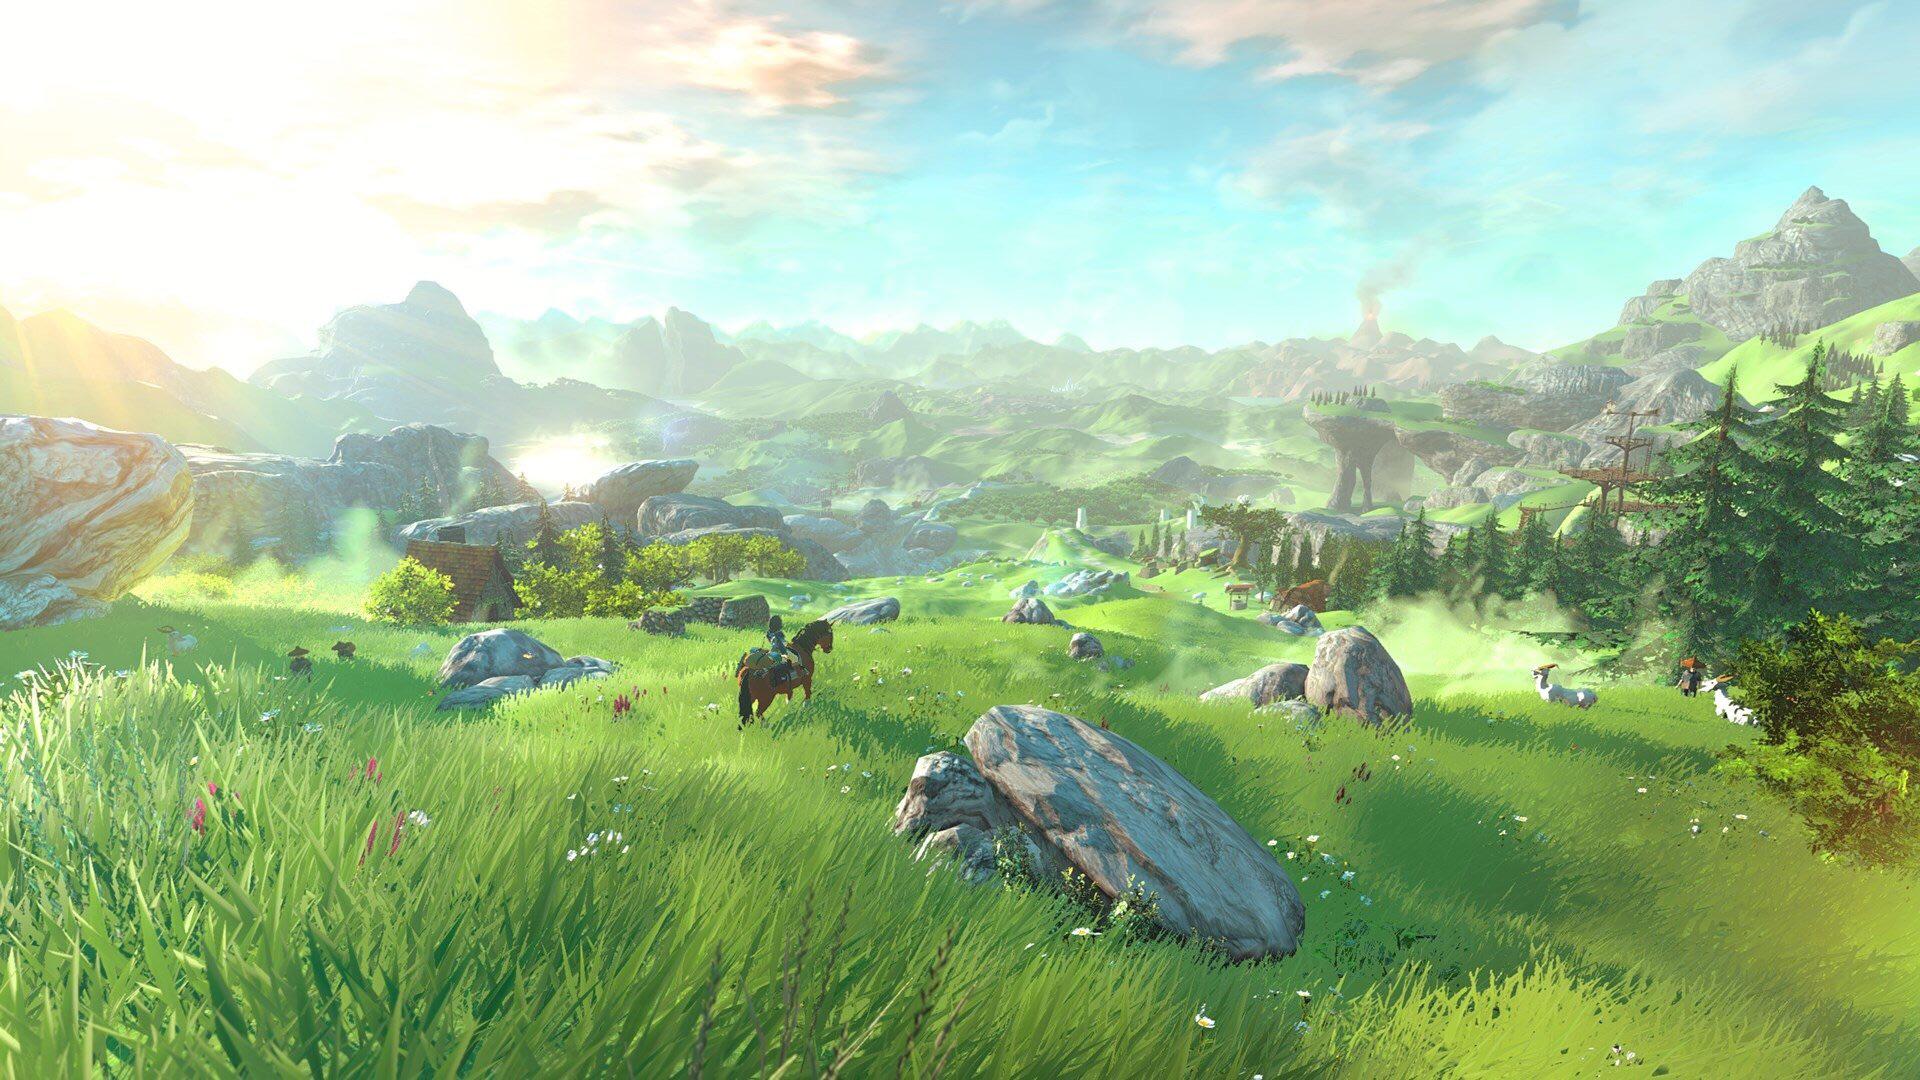 PC Breath of the Wild Wallpaper to match the mobile one I posted